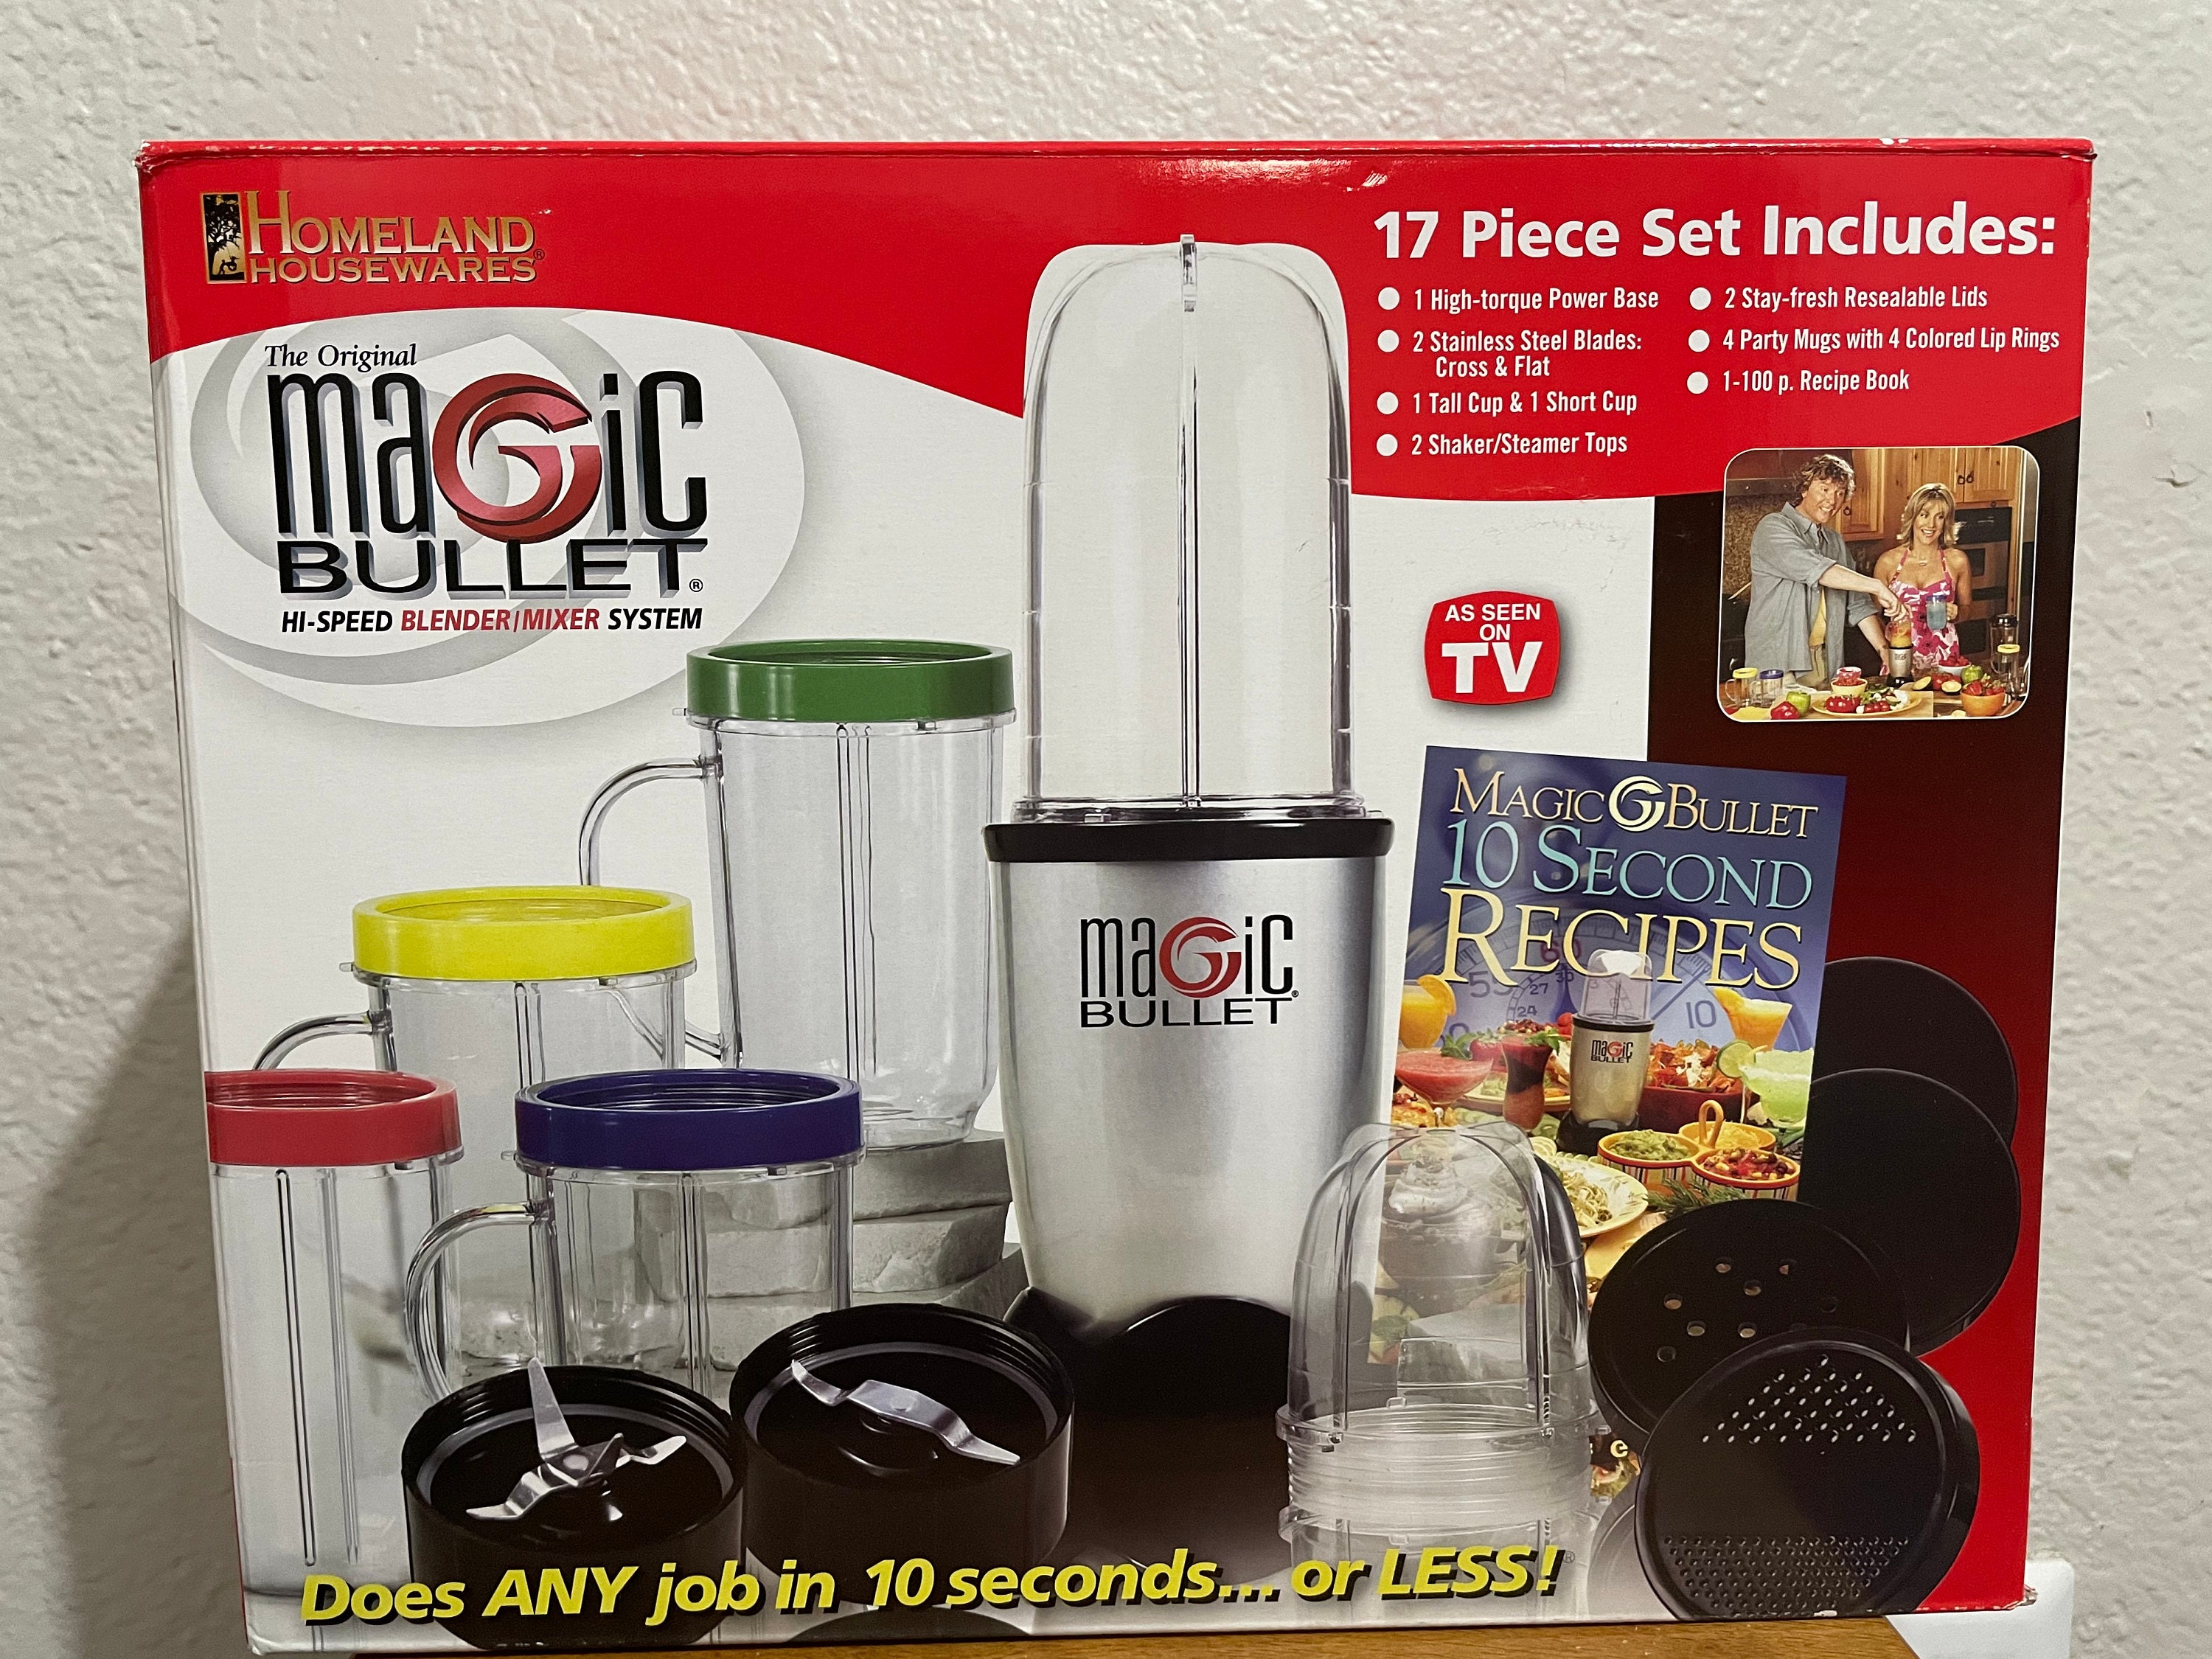 Magic Bullet Replacement Parts 5 Cups, Shaker-Steamer Tops, Lids, Flat Base